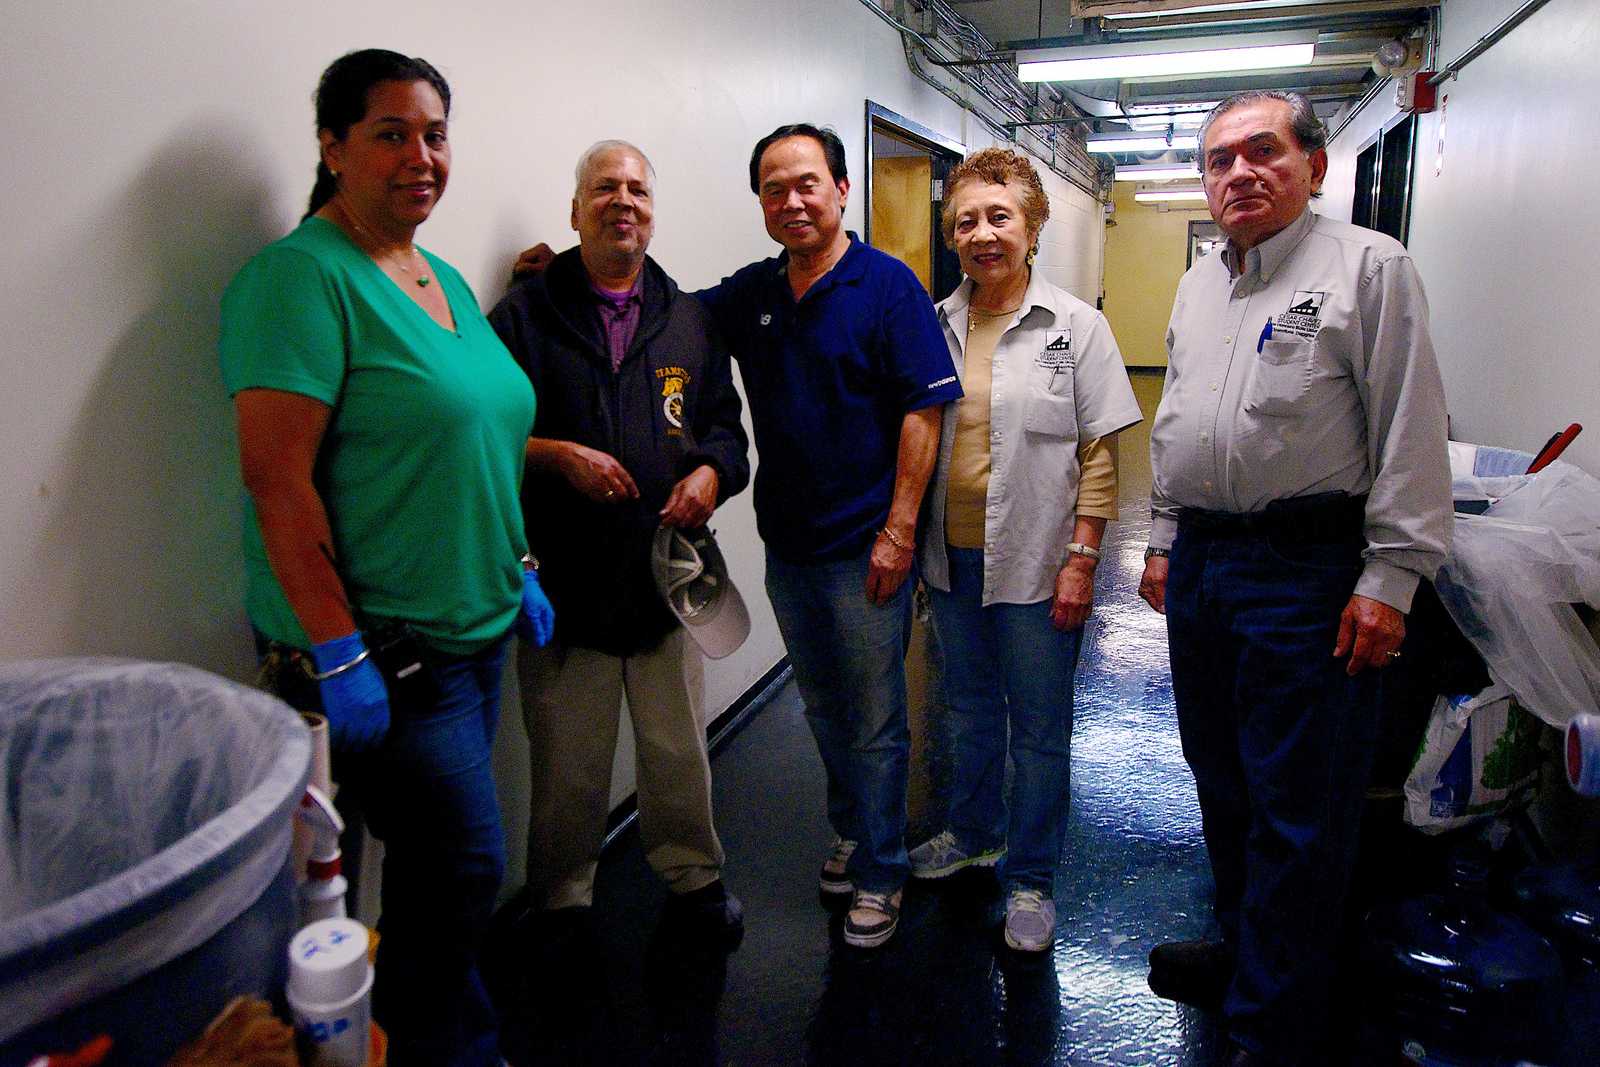 Erika Santos, Naresh Mathur, Bernie Carrera, Maria Suarez and Carlos Rosales pose for a photo in the basement of Cesar Chavez Wednesday Oct 30, 2013. The unionized custodial staff of Cesar Chavez Student Center are unsure where their union will stand following a campus auxiliary merger. Photo by Kate O'Neal / Xpress